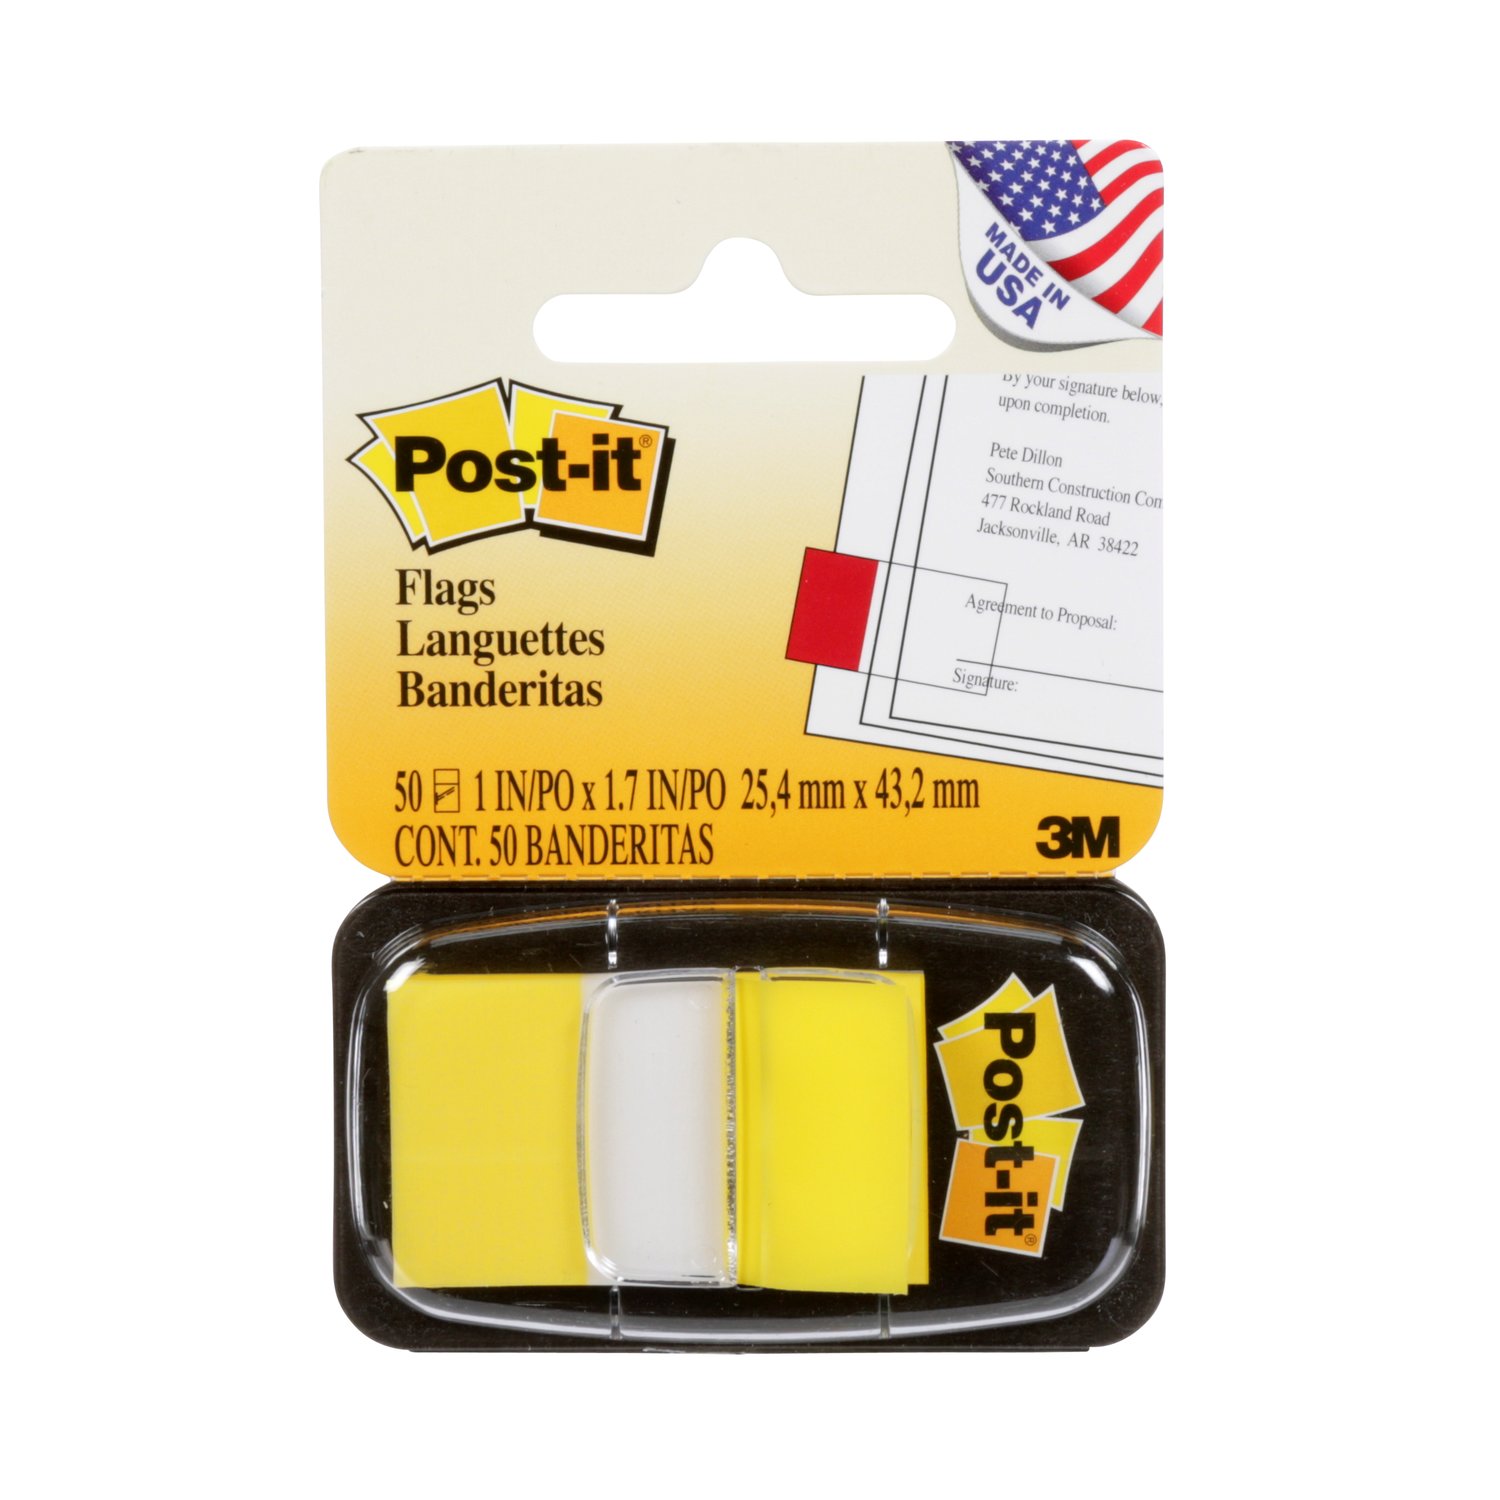 7100033524 - Post-it Flags 680-5-24, 1 in. x 1.7 in. (25,4 mm x 43,2 mm) Canary
Yellow 24 dis/pk 2 pk/cs